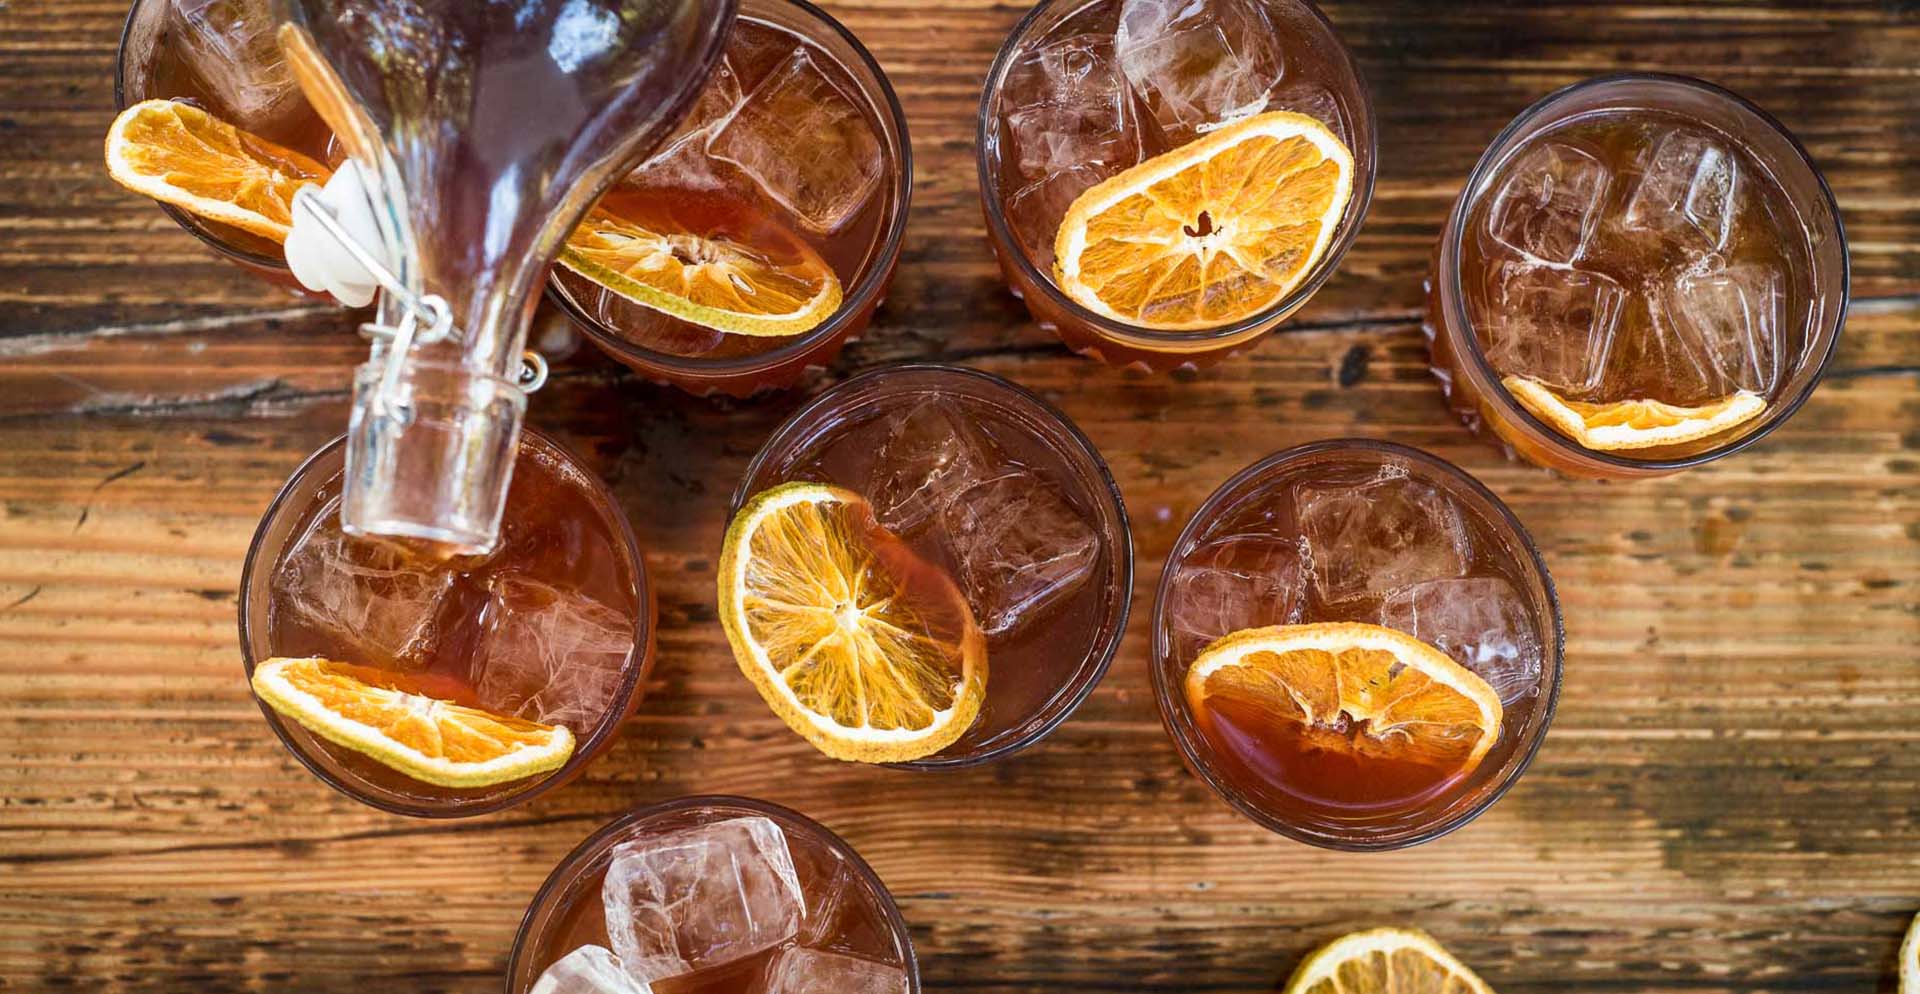 Batched Cocktails: A Coffee Negroni for Ten People